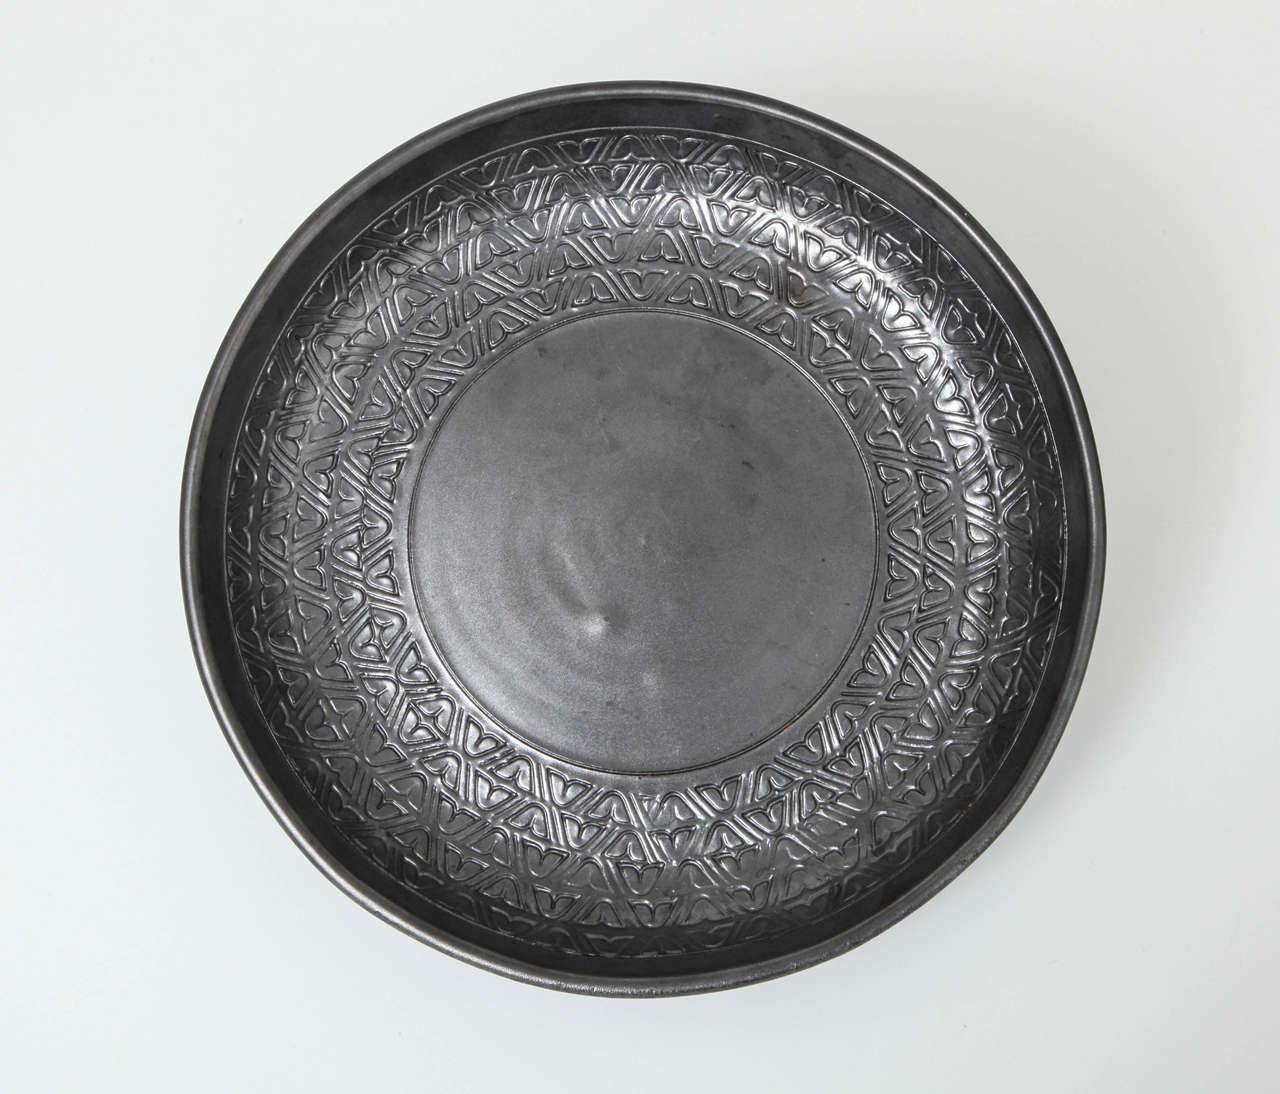 Incised ceramic bowl with platinum metallic finish. By Bitossi for Raymor.

